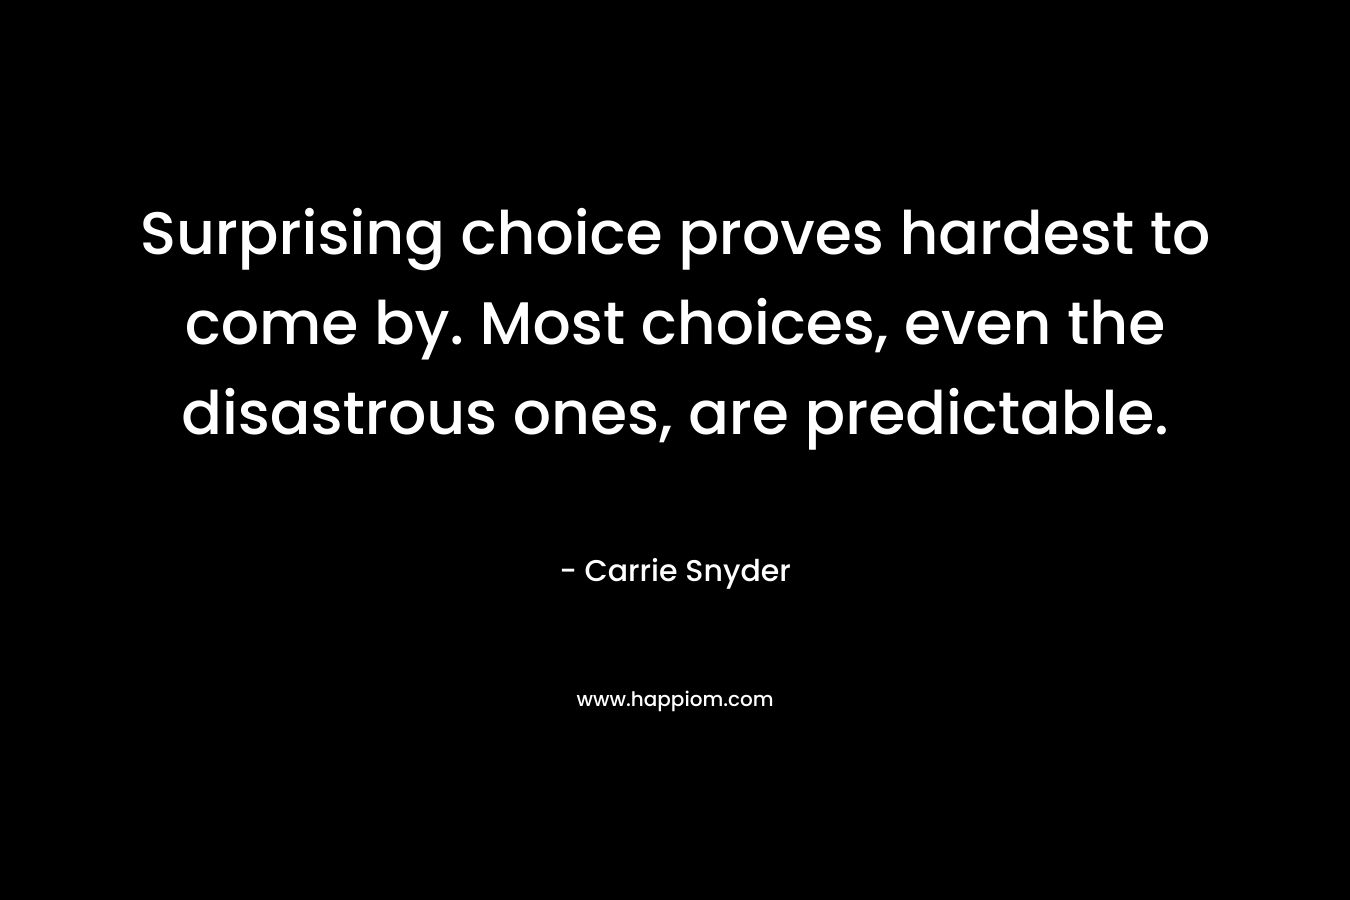 Surprising choice proves hardest to come by. Most choices, even the disastrous ones, are predictable.